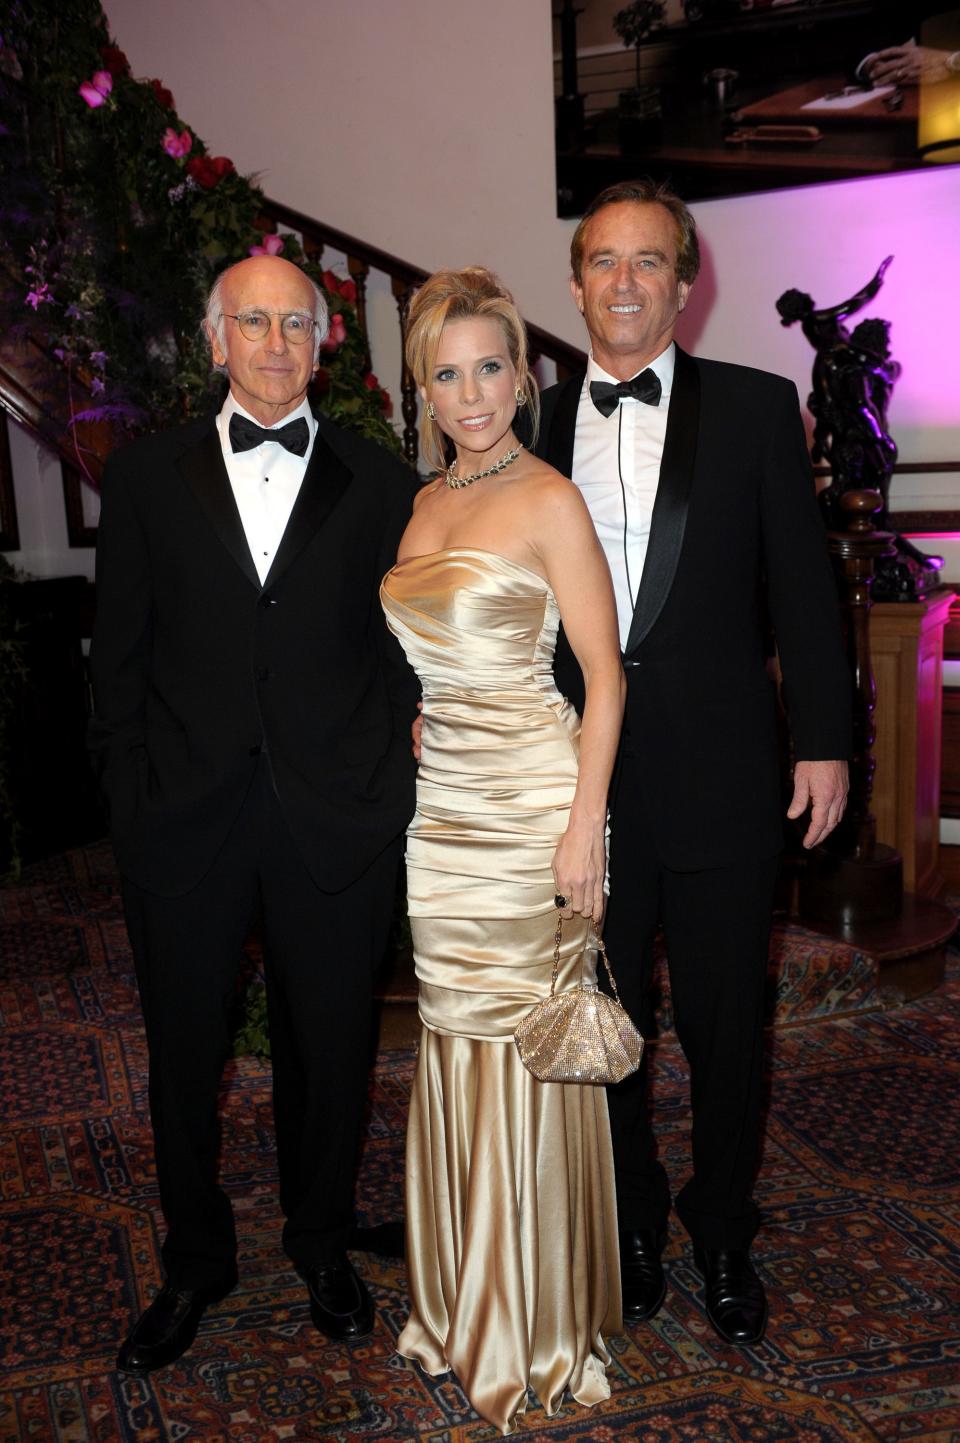 Famous parents Larry David, Cheryl Hines and Robert F. Kennedy Jr attended Le Bal in 2013.